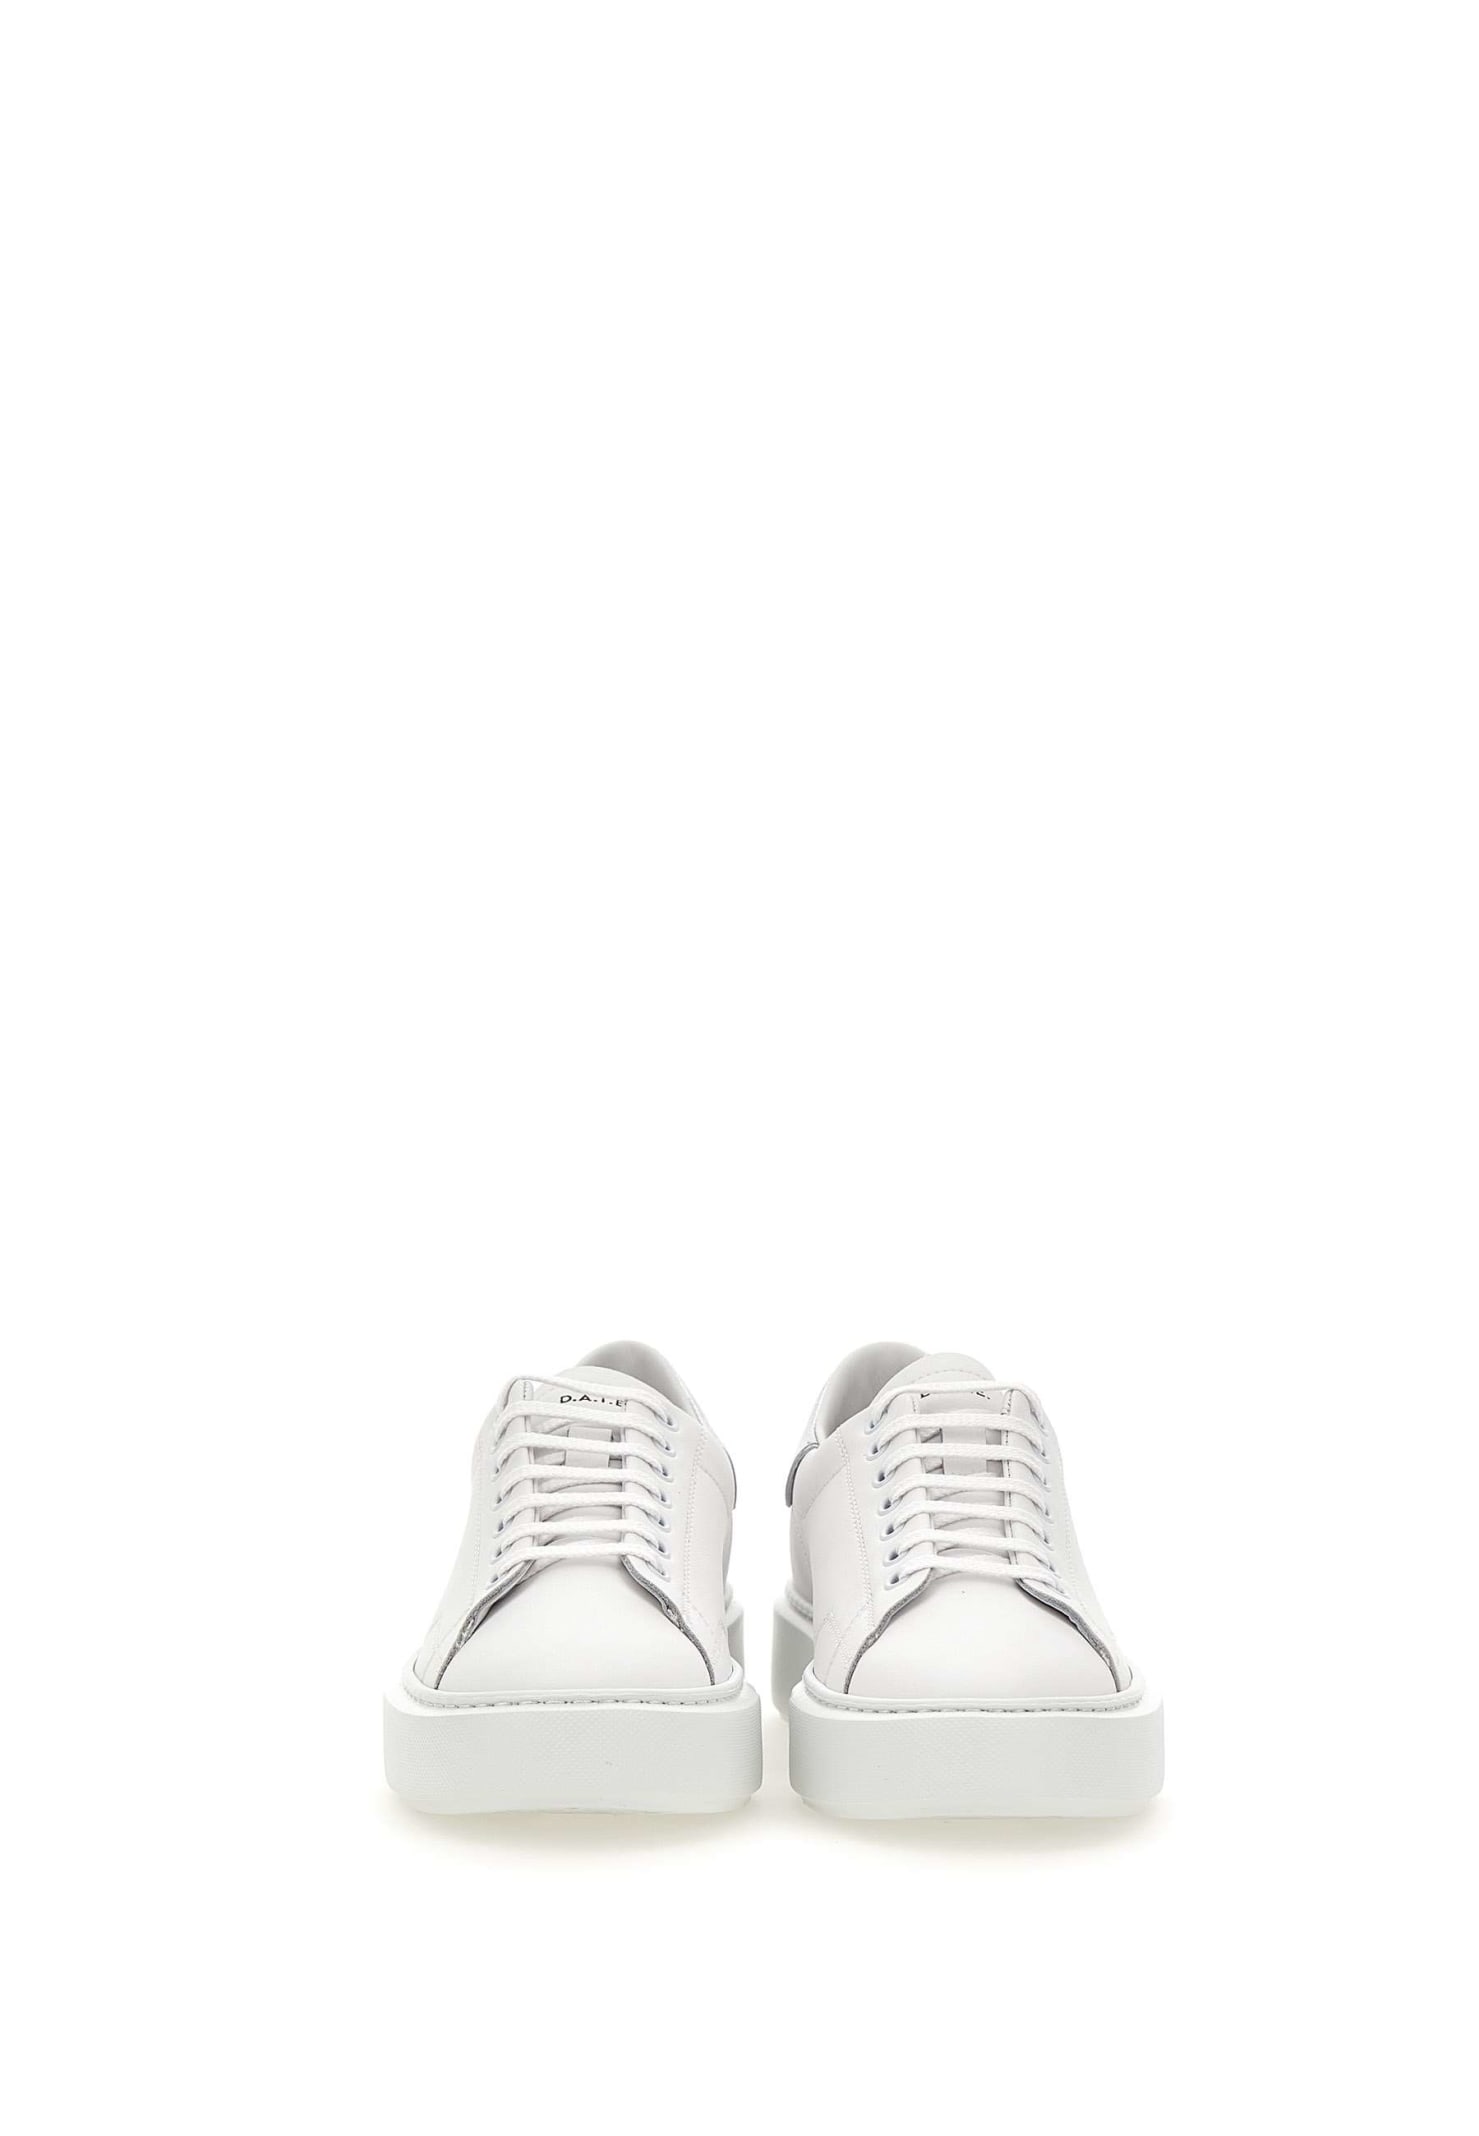 Shop Date Sfera Laminated Leather Sneakers In White